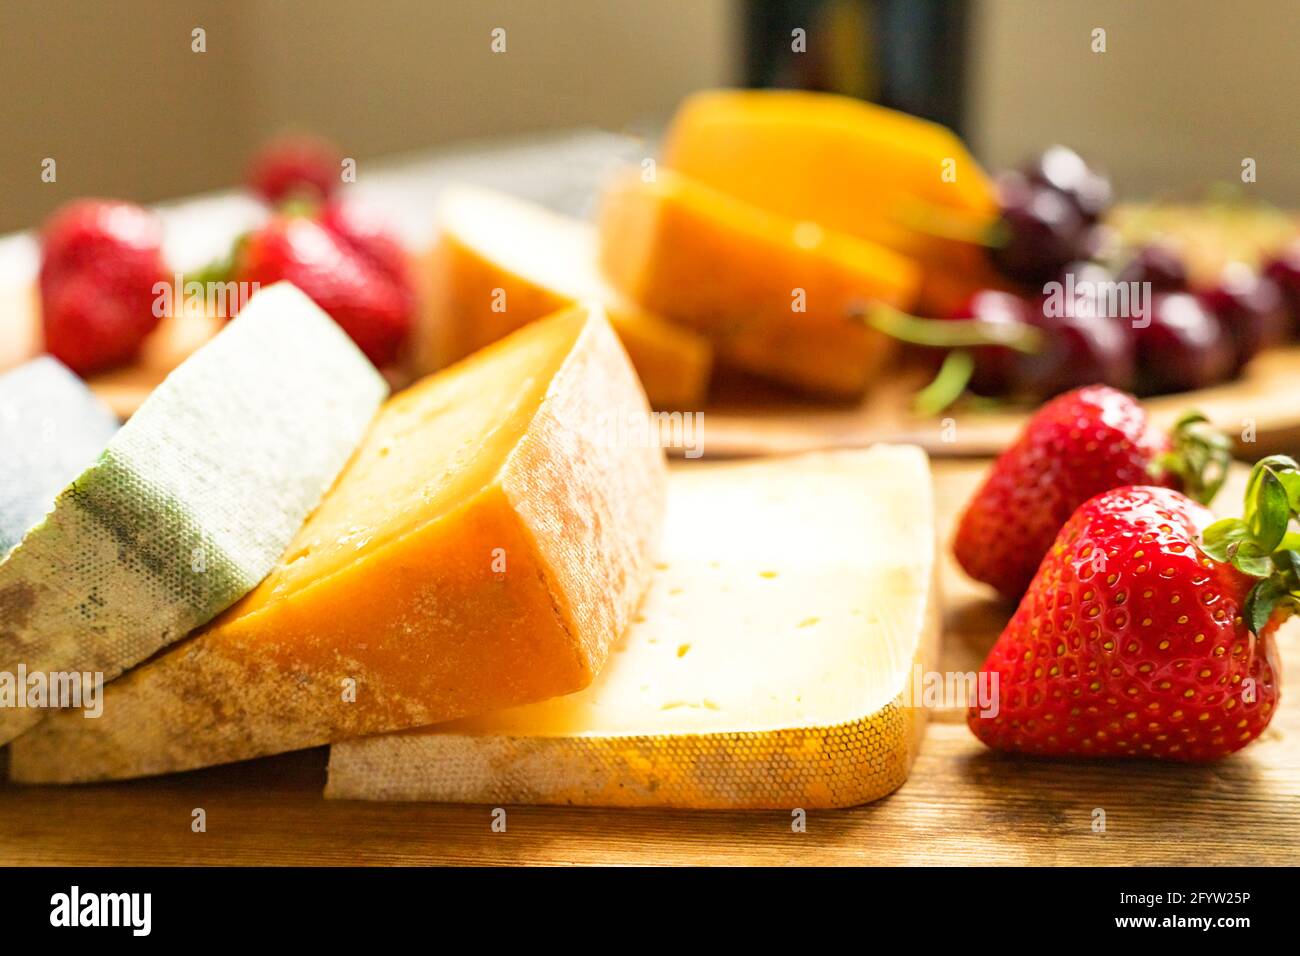 Assorted different colors craft cheese slices with berries on wooden tray background Stock Photo